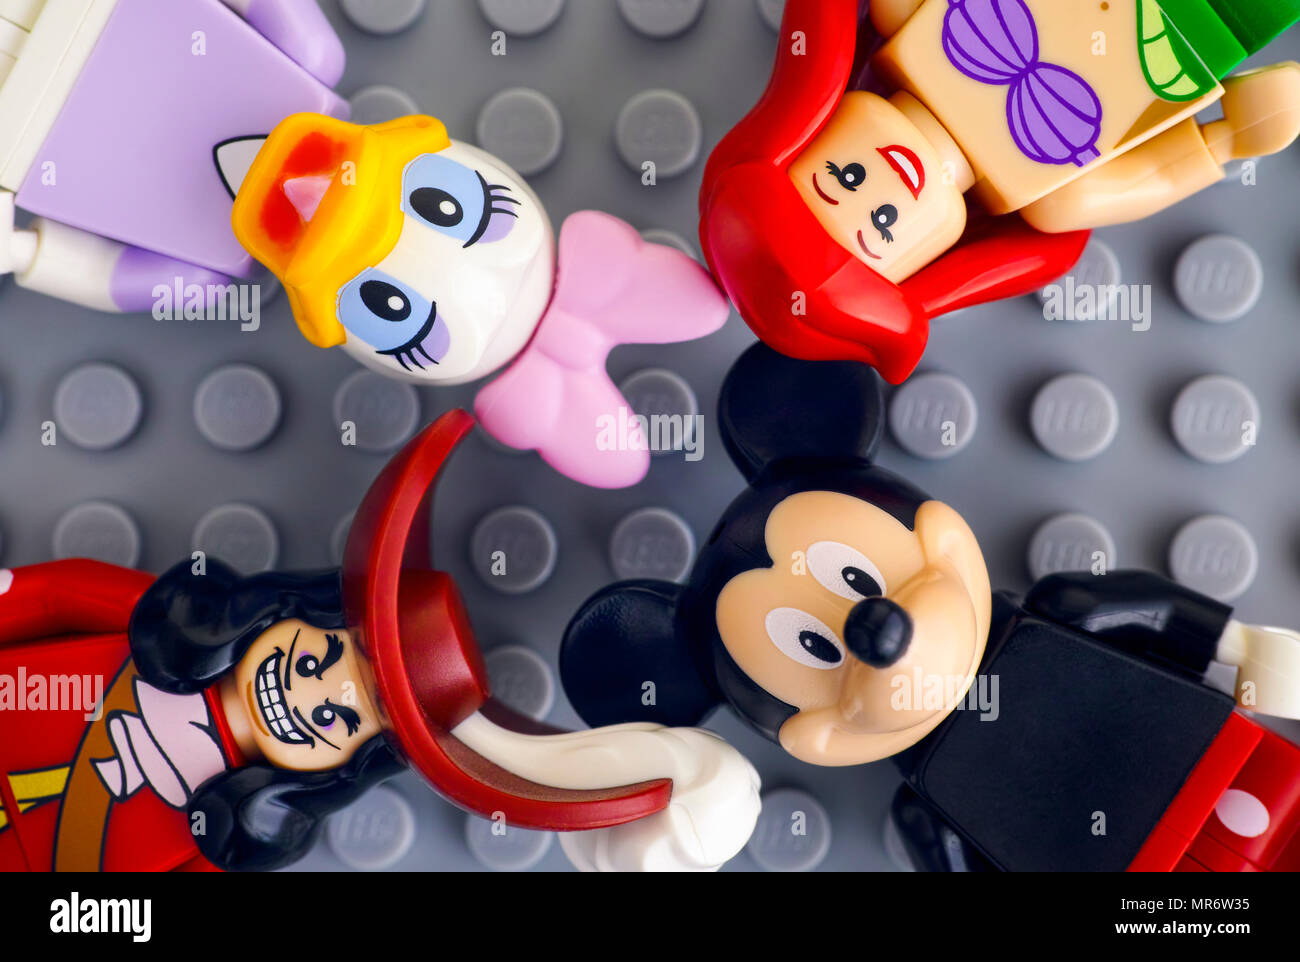 https://c8.alamy.com/comp/MR6W35/tambov-russian-federation-may-20-2018-four-lego-disney-minifigures-mickey-mouse-daisy-duck-ariel-captain-hook-on-gray-background-MR6W35.jpg